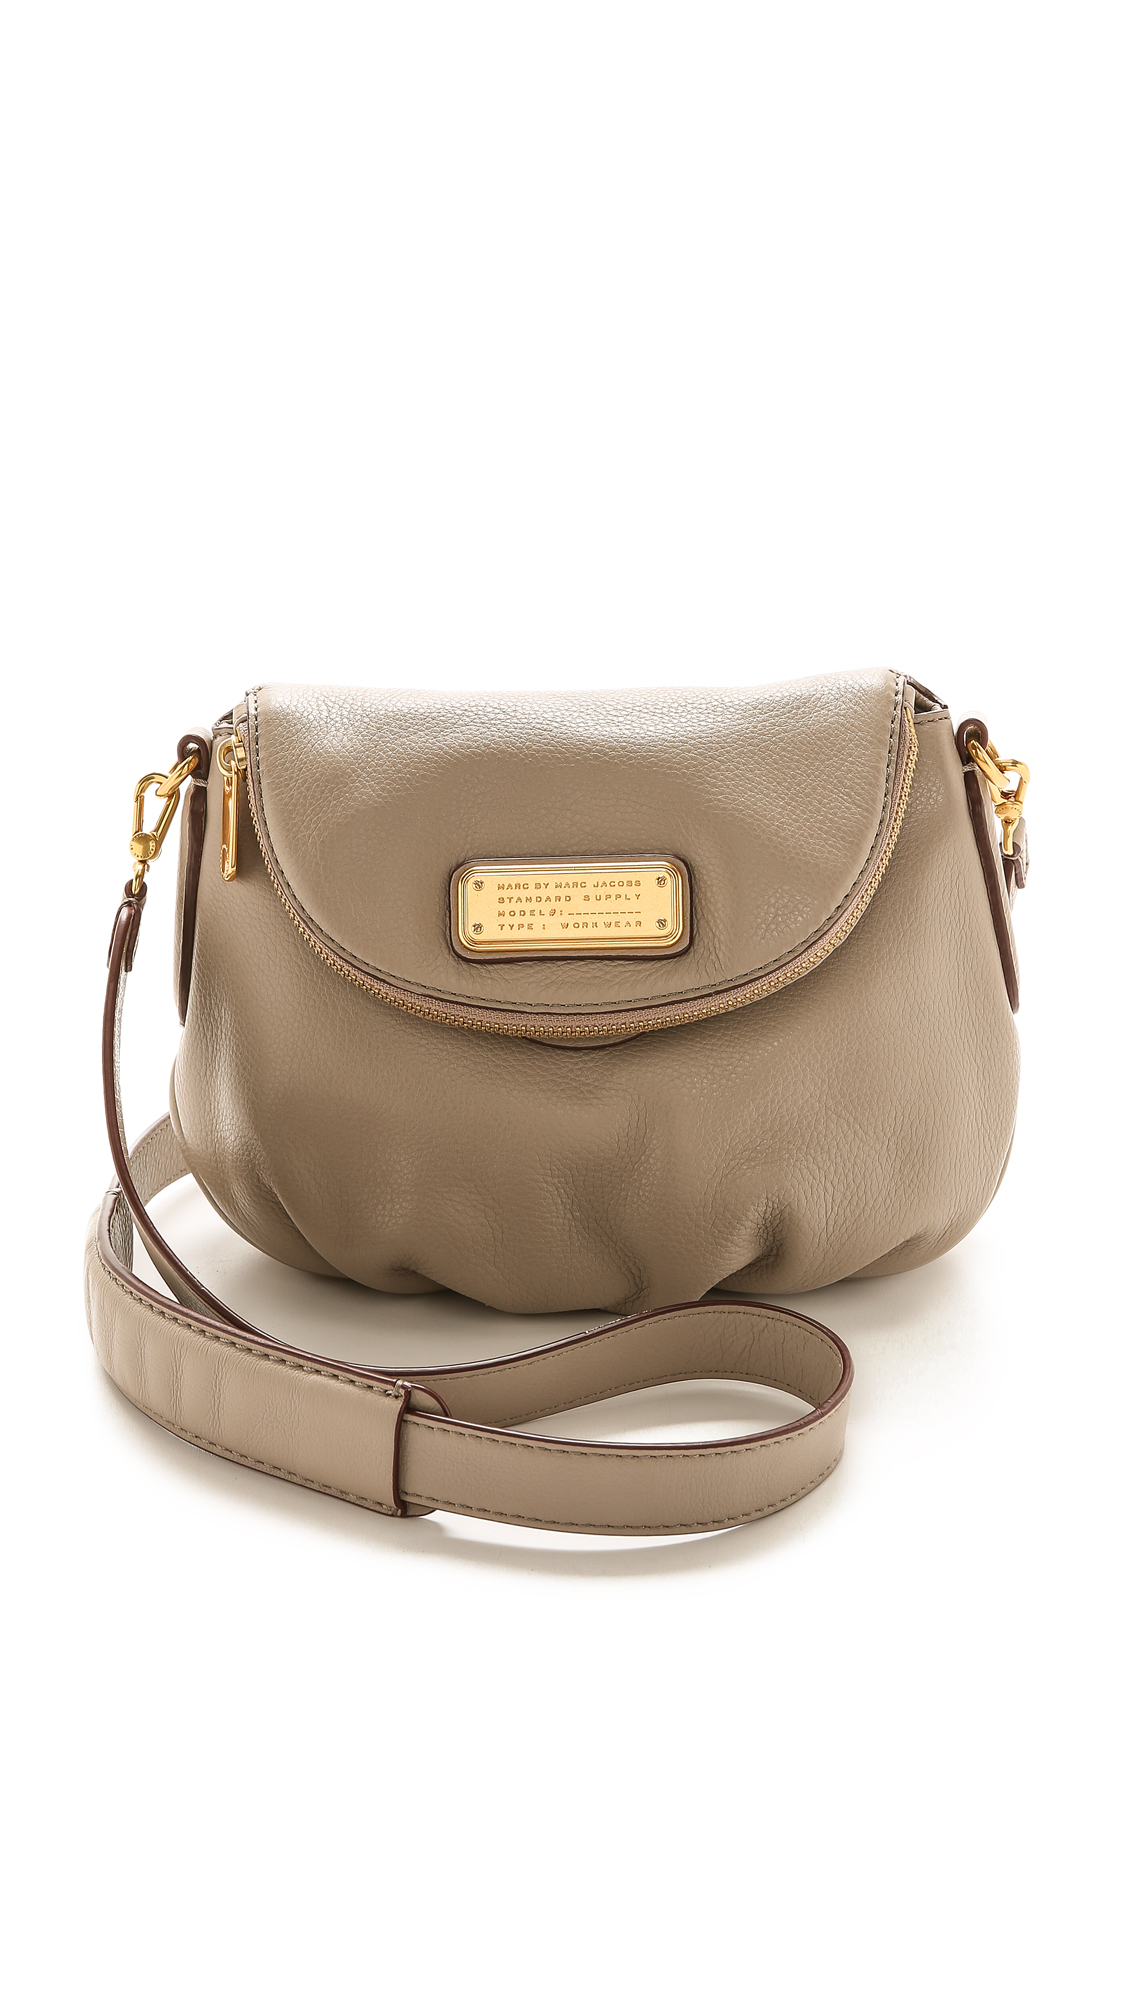 Marc by marc jacobs New Q Mini Natasha Bag - Cement in Brown | Lyst